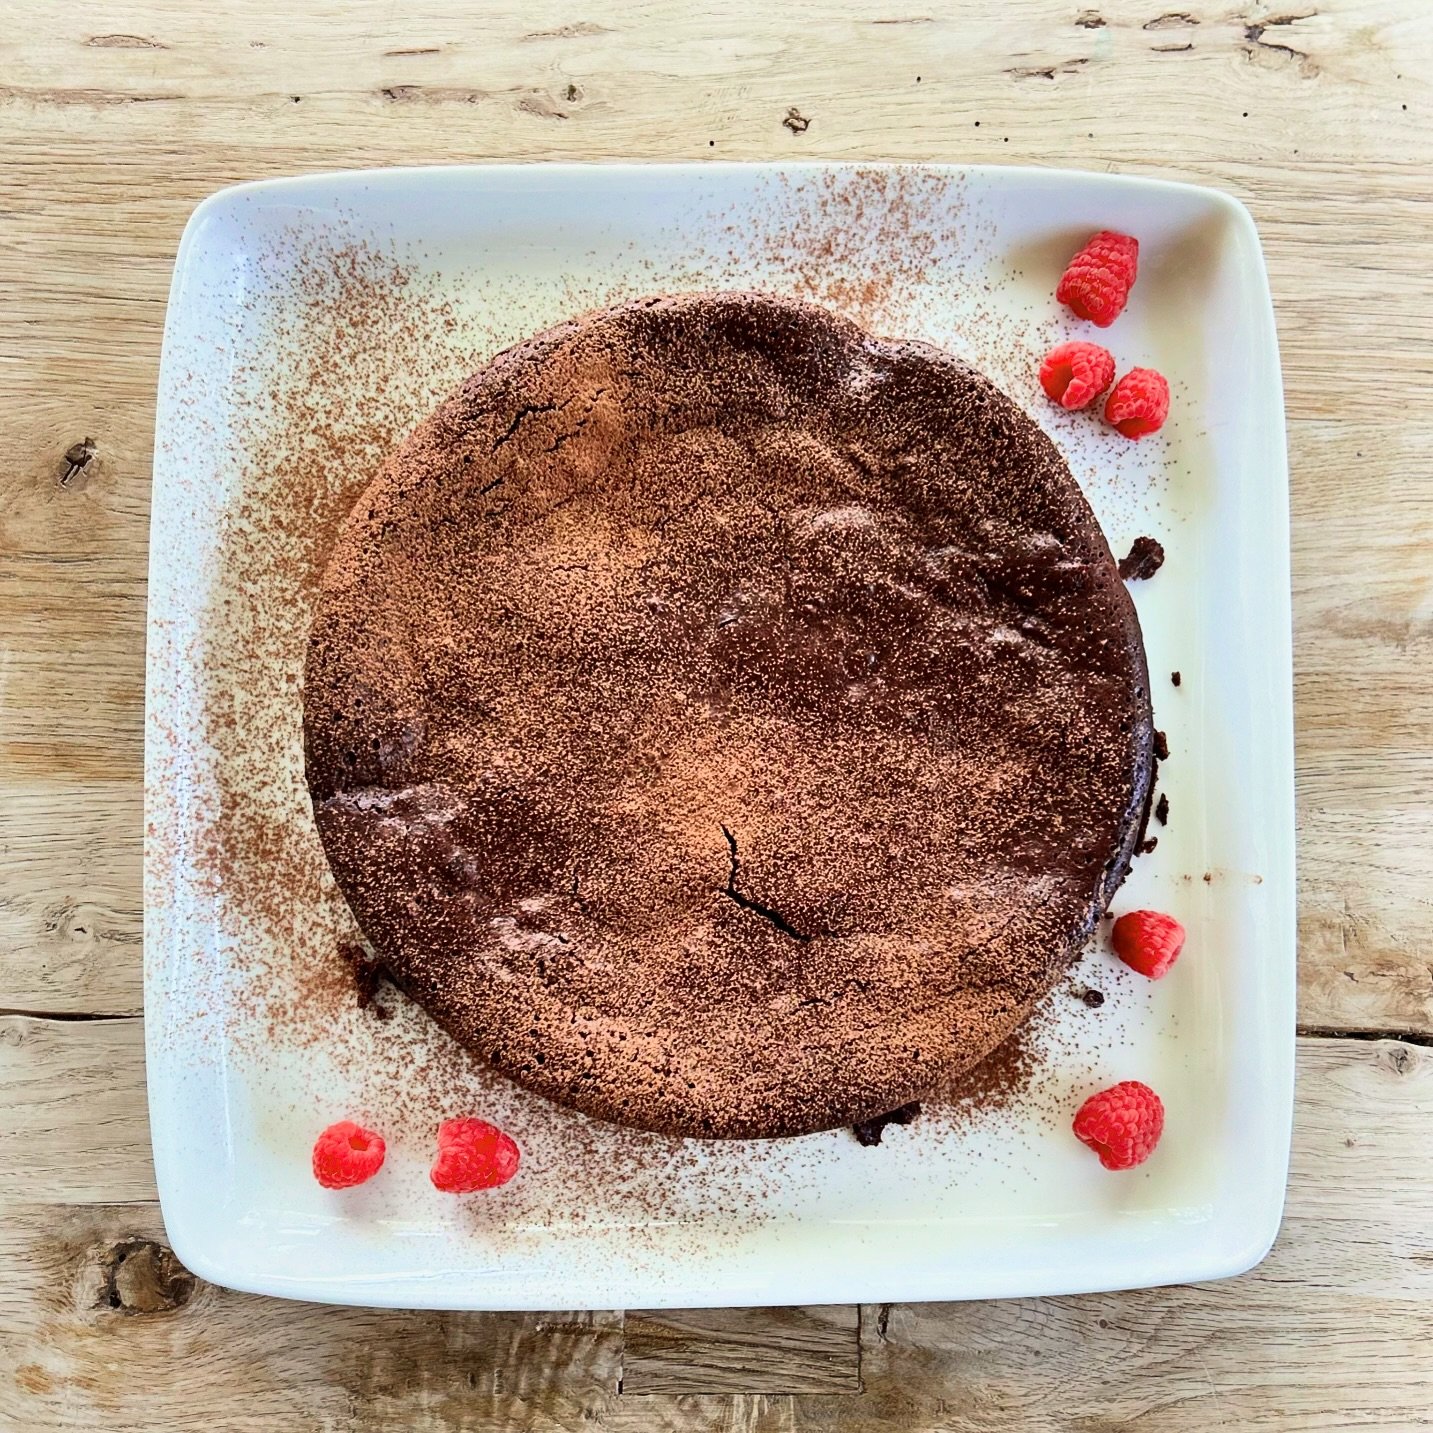 About that Earl Grey Chocolate Souffl&eacute; from last night&rsquo;s menu post..
One of my favorite desserts to serve when company comes. It&rsquo;s not everyday that you eat souffl&eacute;, and @athenacalderone just knows how to elevate anything&he